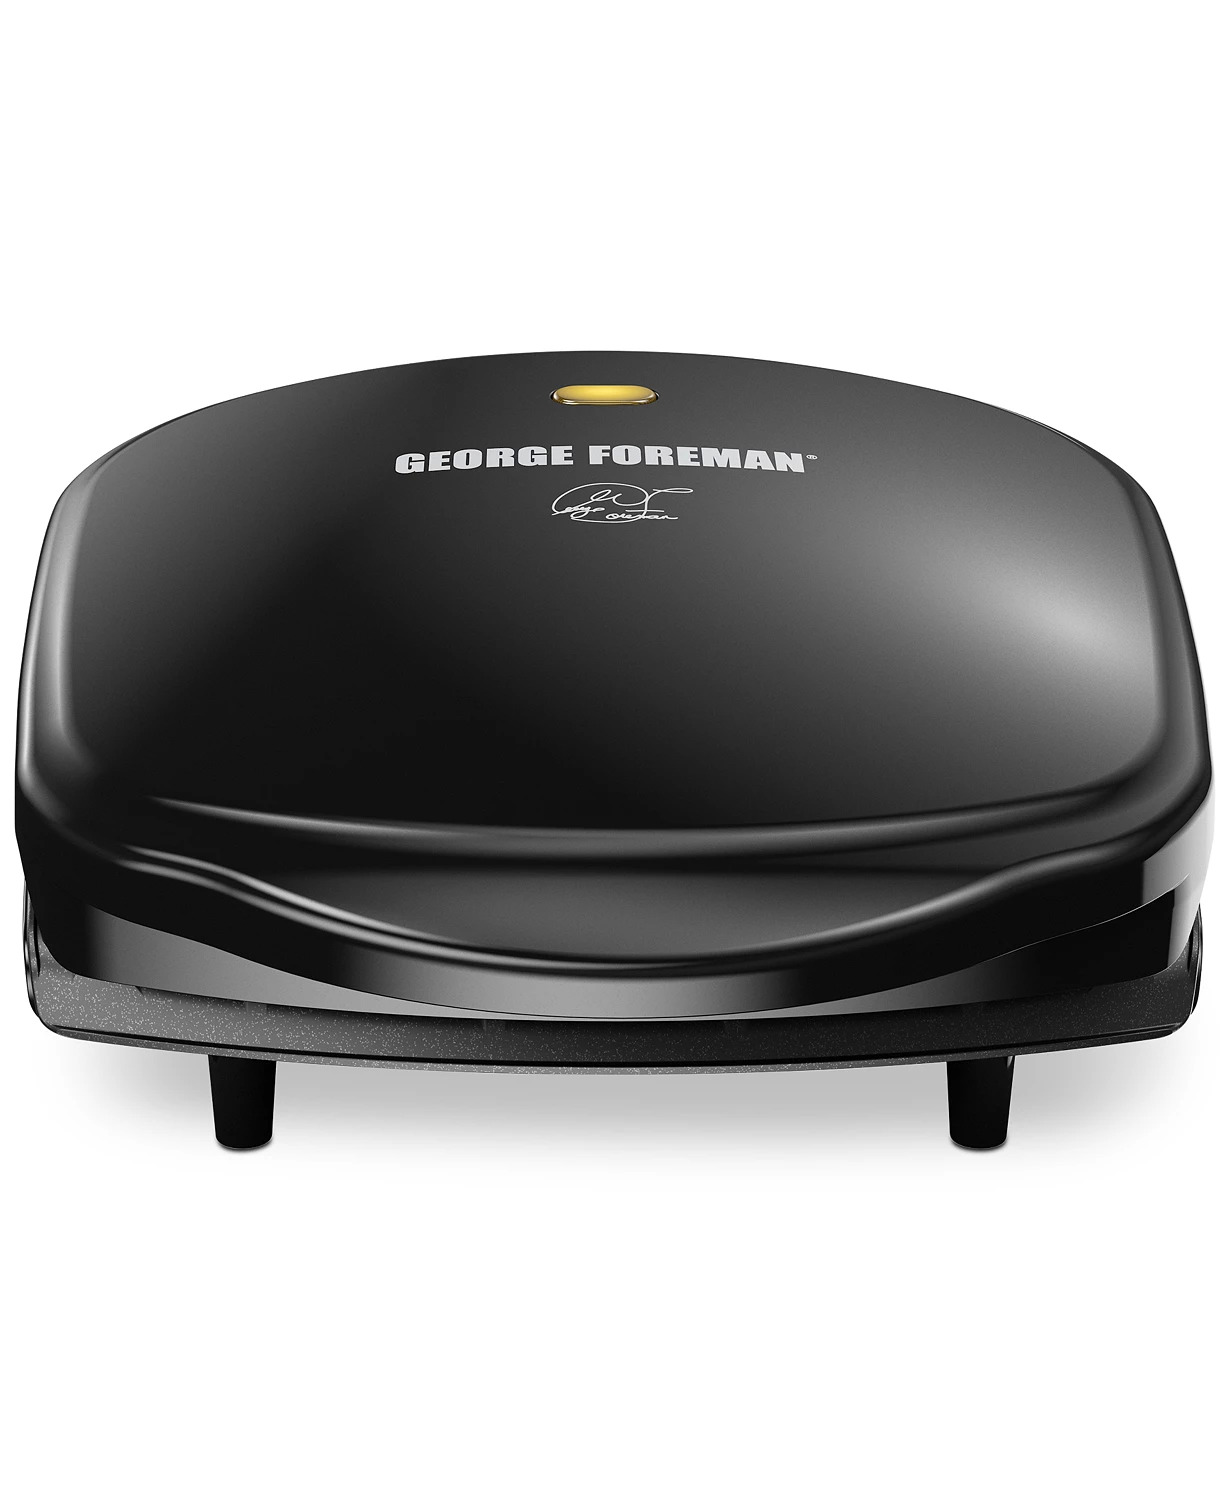 GEORGE FOREMAN 2-serving classic plate electronic indoor grill & panini press $9.99